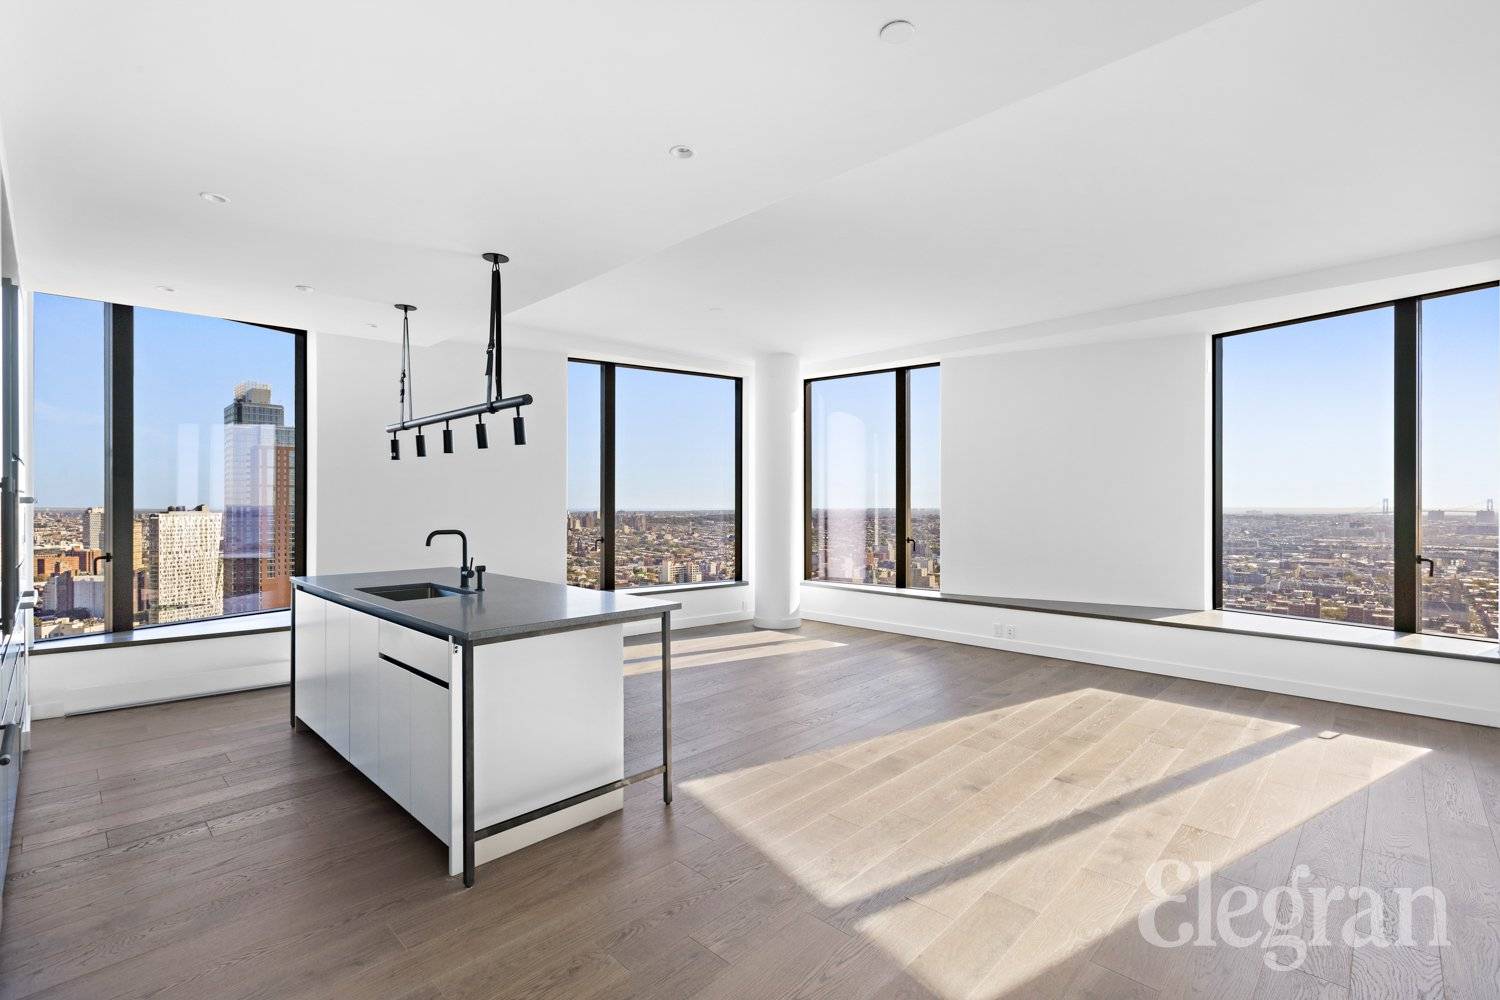 A new level of luxury awaits at Tishman Speyer s 11 Hoyt, perfectly positioned right in the beating heart of Brooklyn.